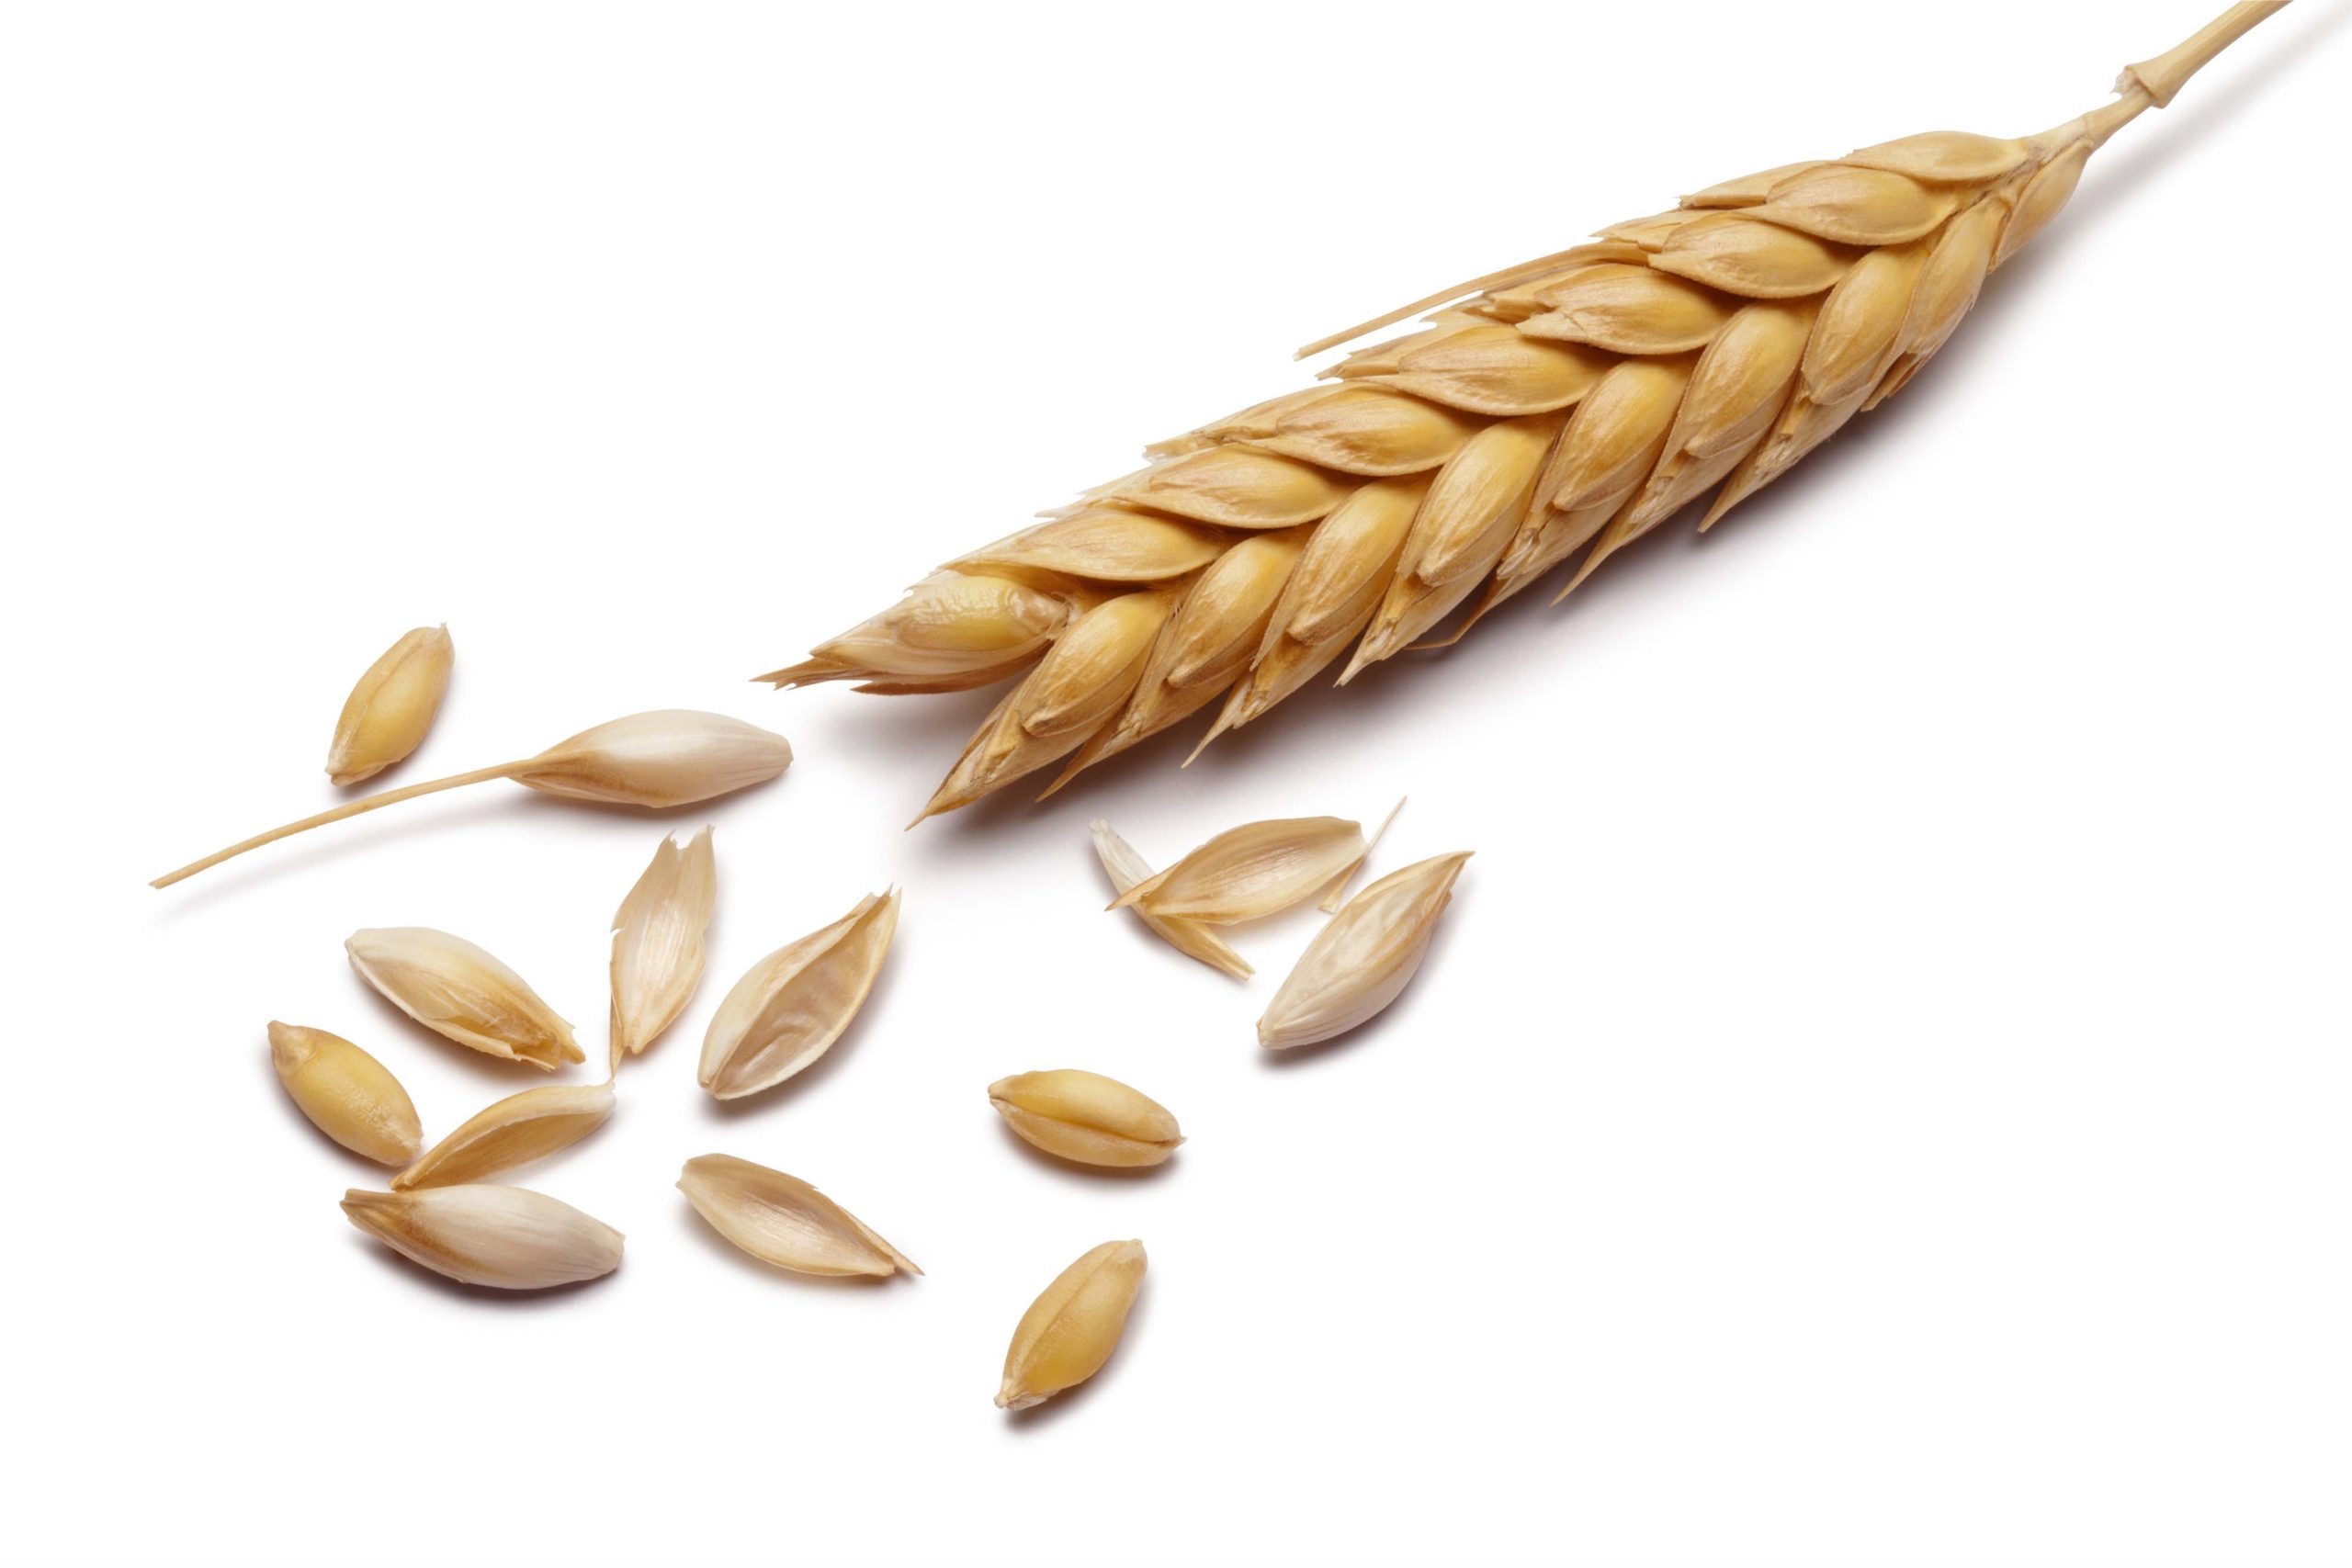 A wheat stalk with some grains off the stalk on a white background.